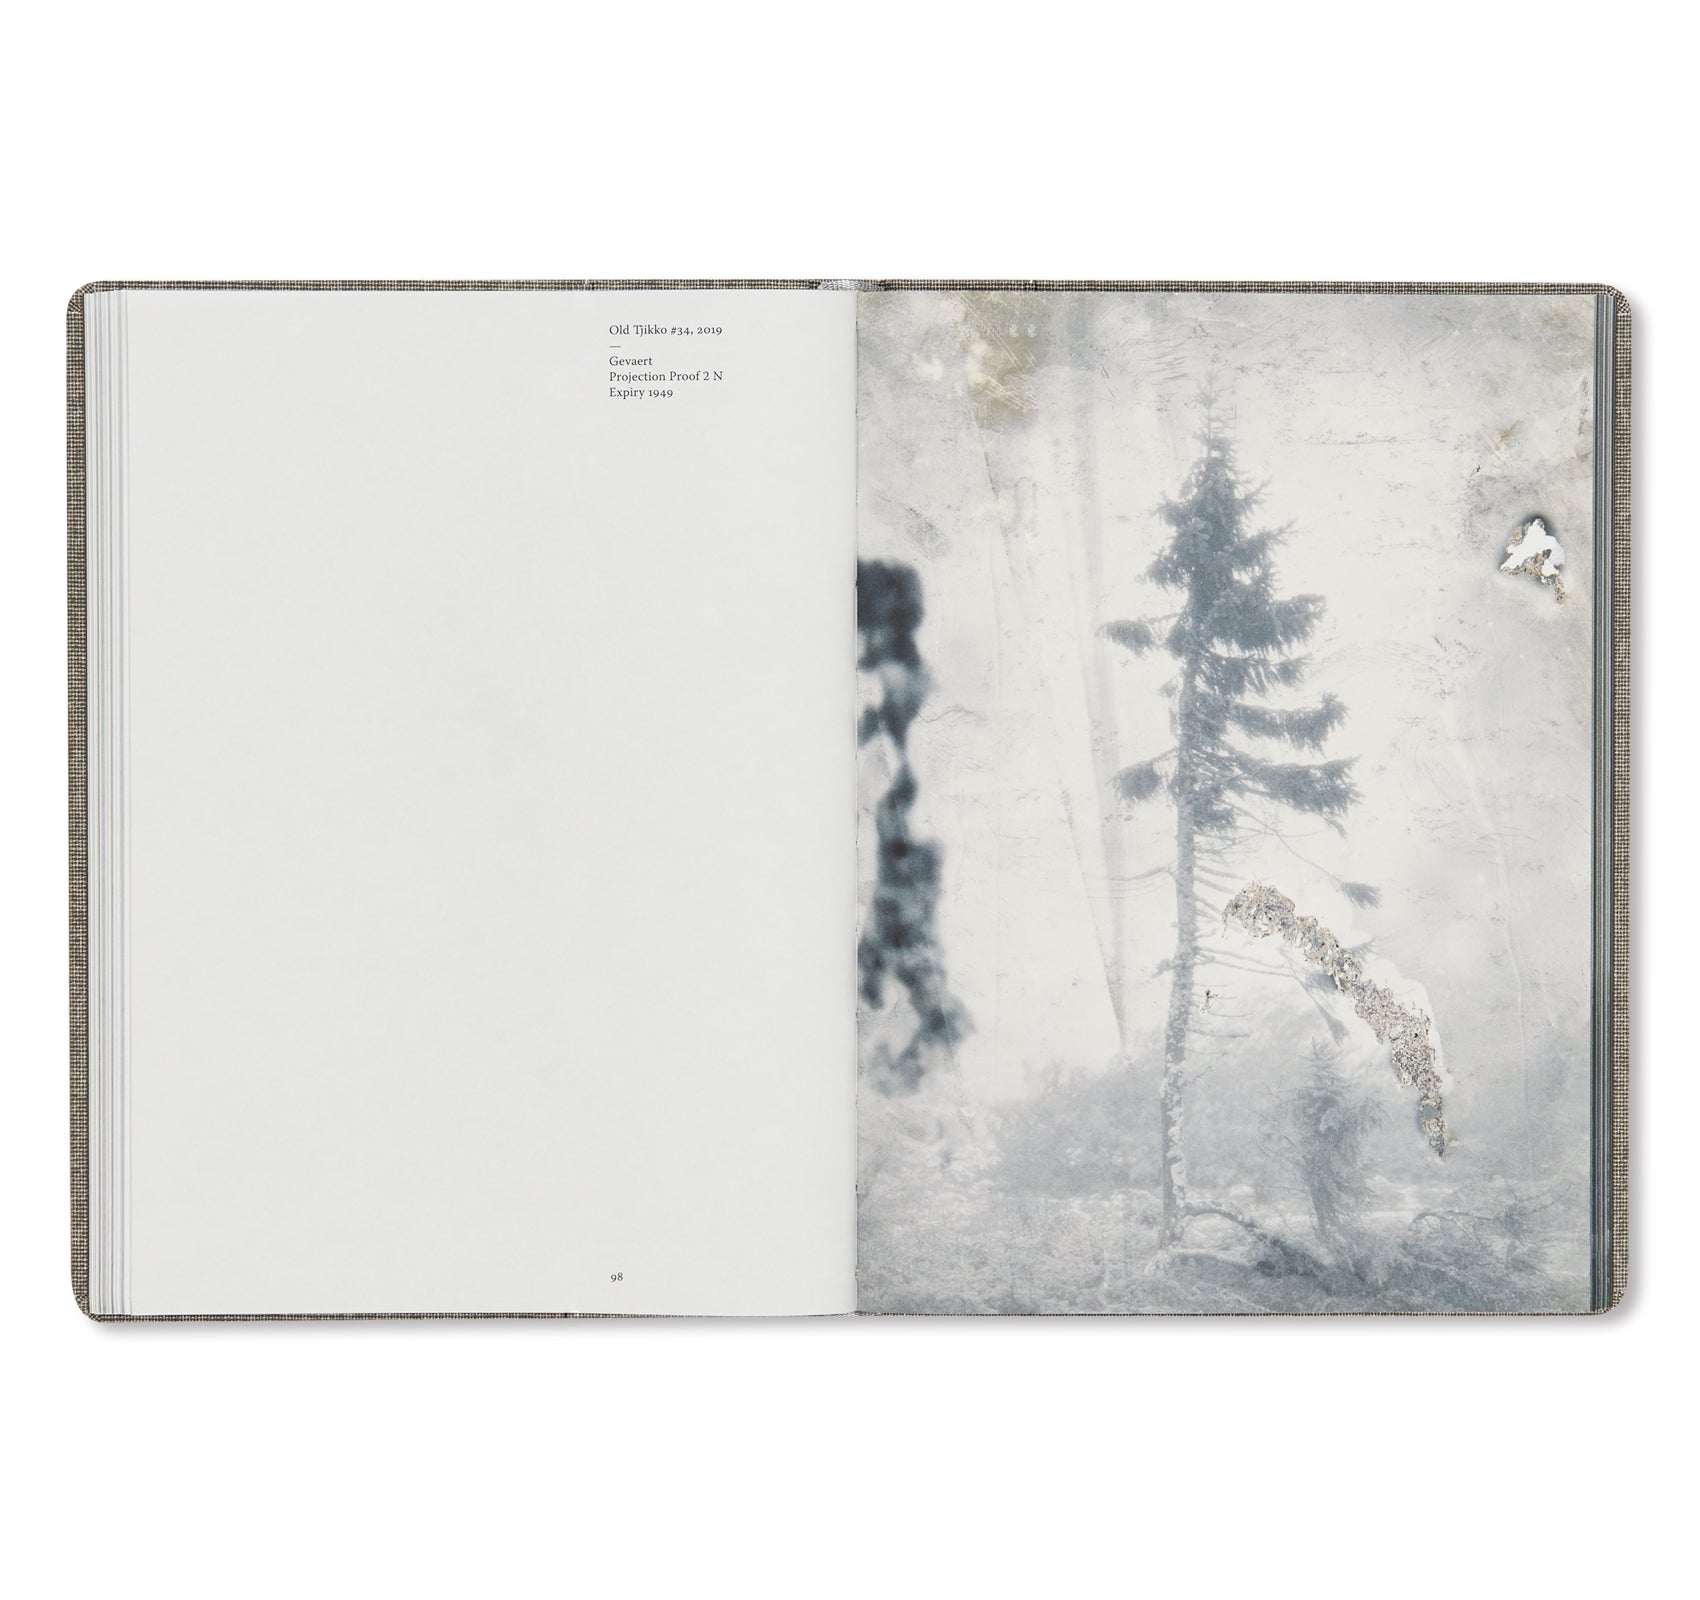 OLD TJIKKO by Nicolai Howalt [SECOND EDITION]